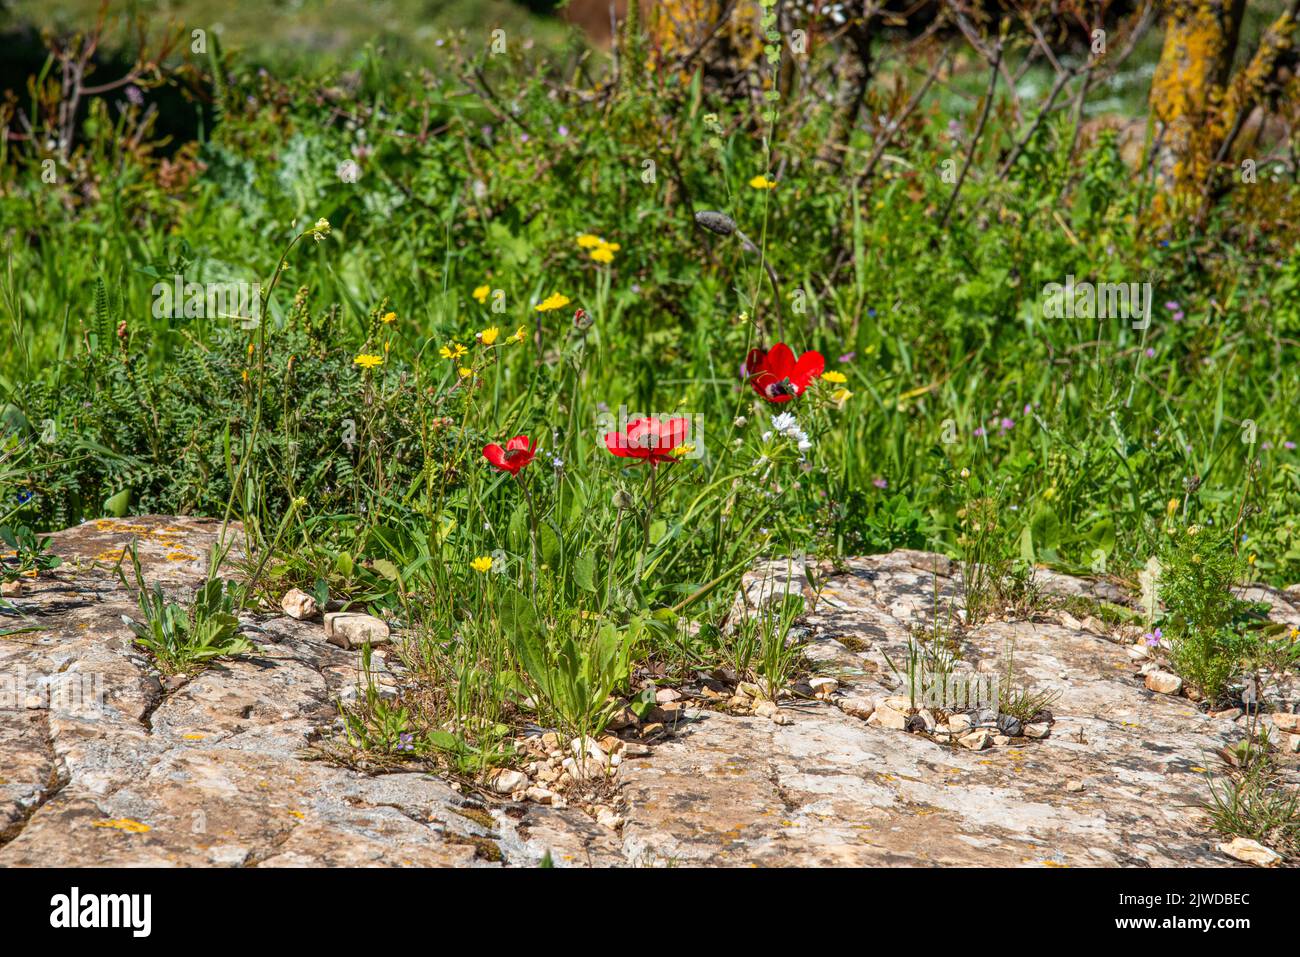 Red poppies, cornflowers and wheat spikes. Fragile nature, environment biodiversity concepts. Rural background. High quality photo Stock Photo